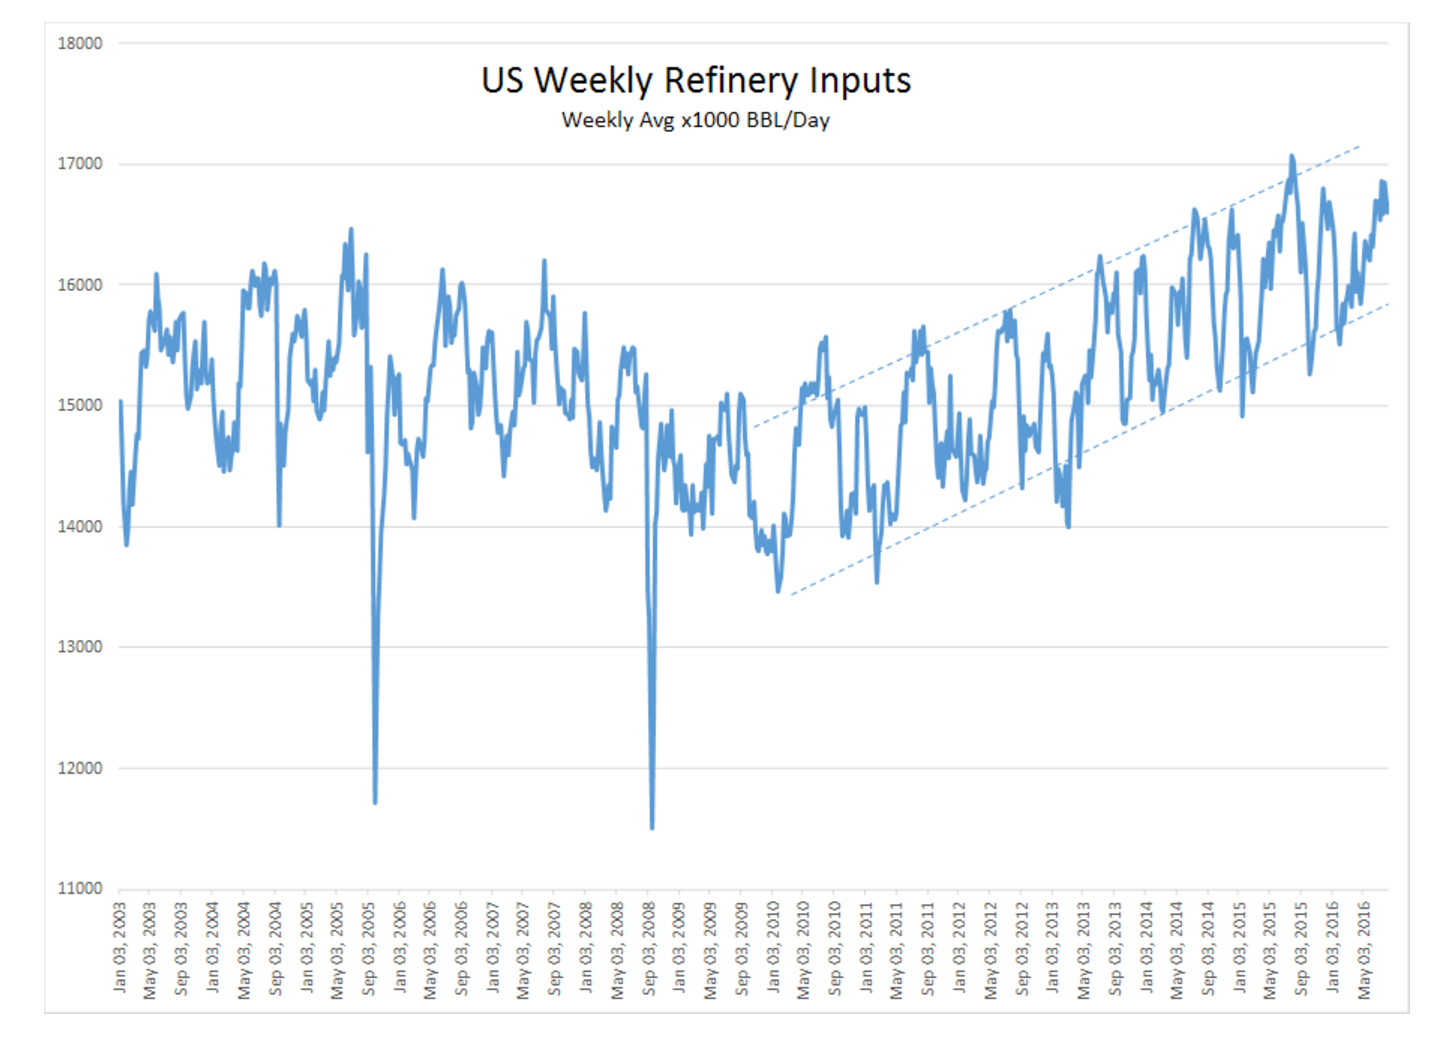 US Weekly Refinery Inputs